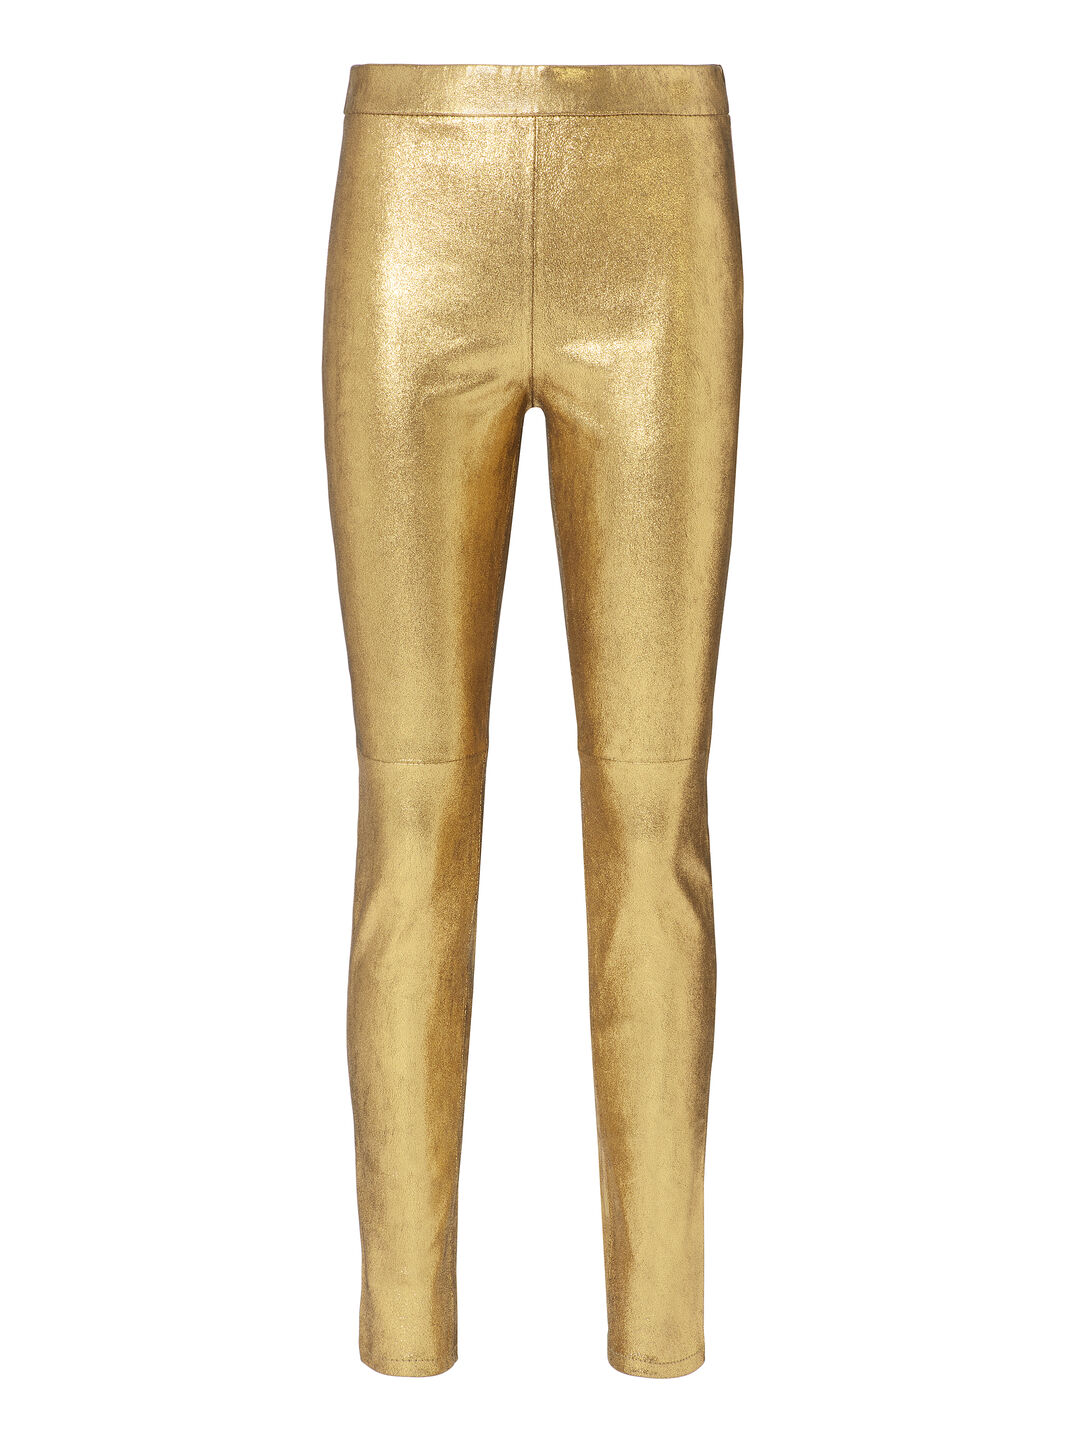 Hartley Stretch Gold Leather Leggings